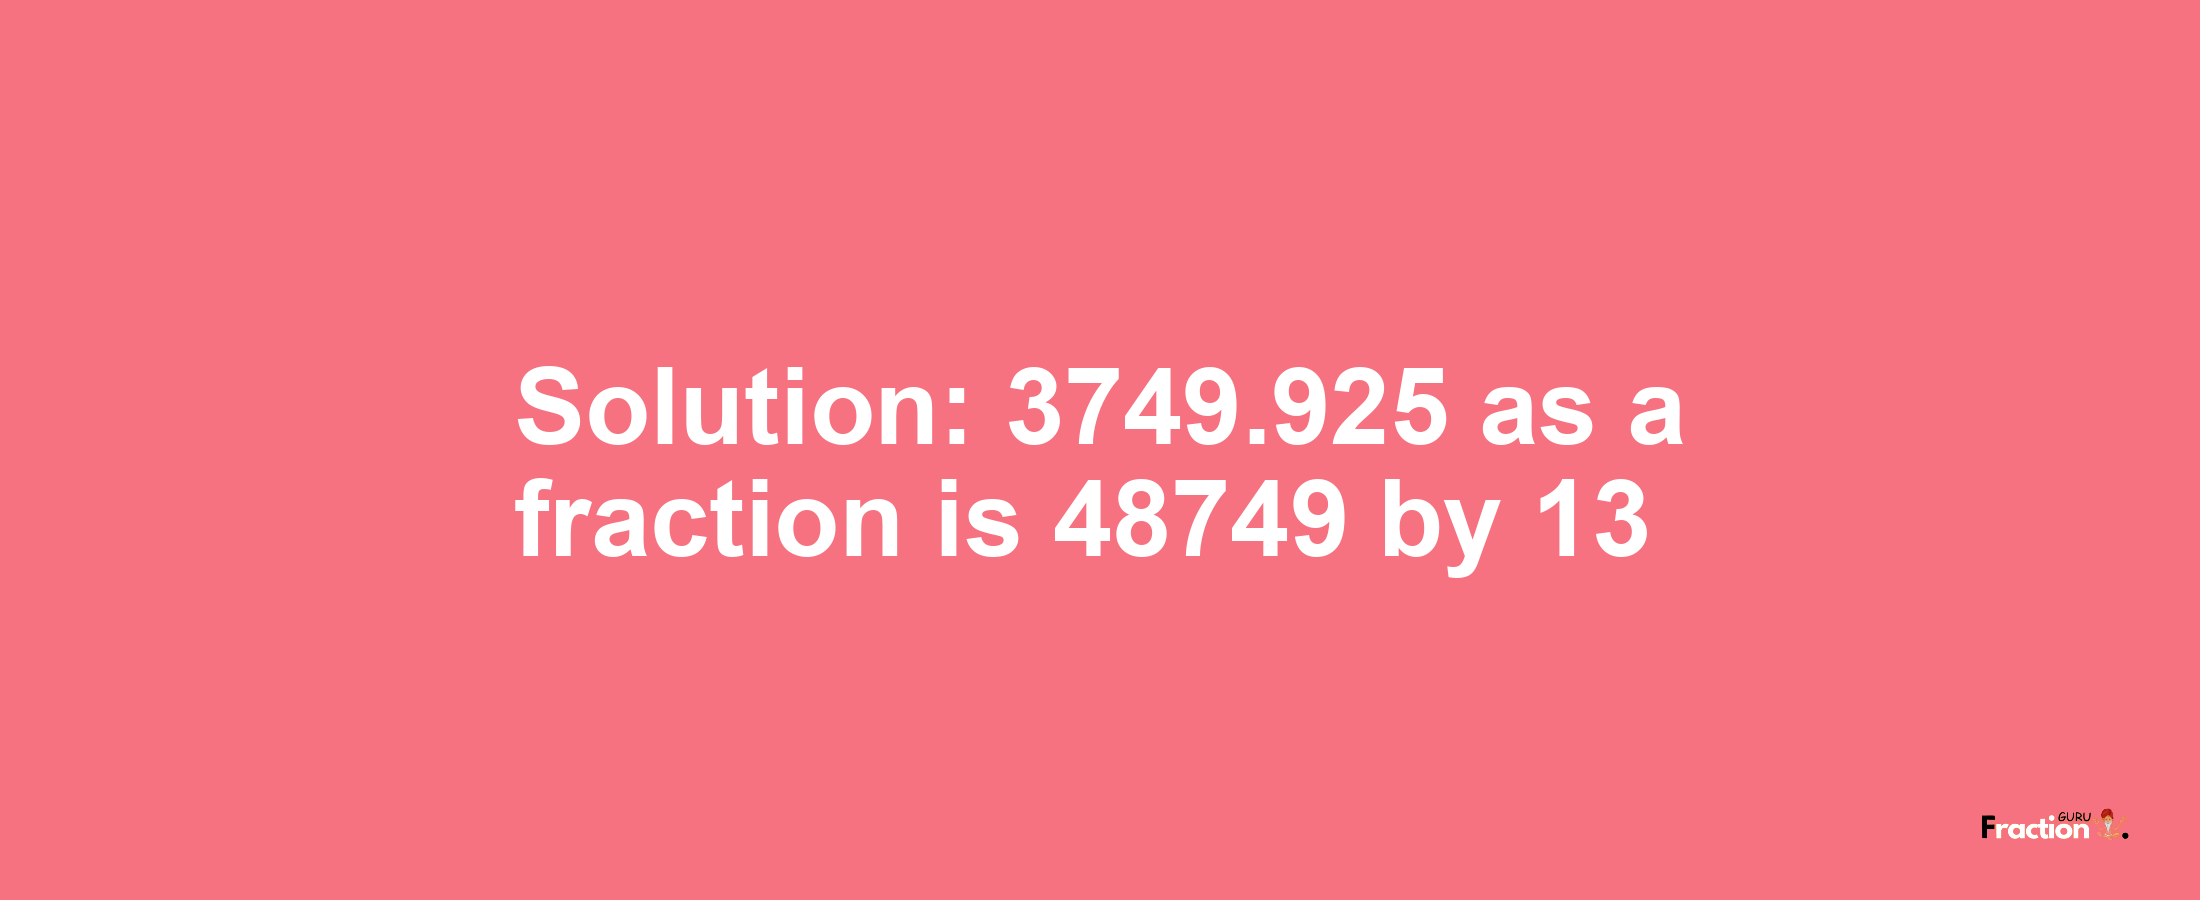 Solution:3749.925 as a fraction is 48749/13